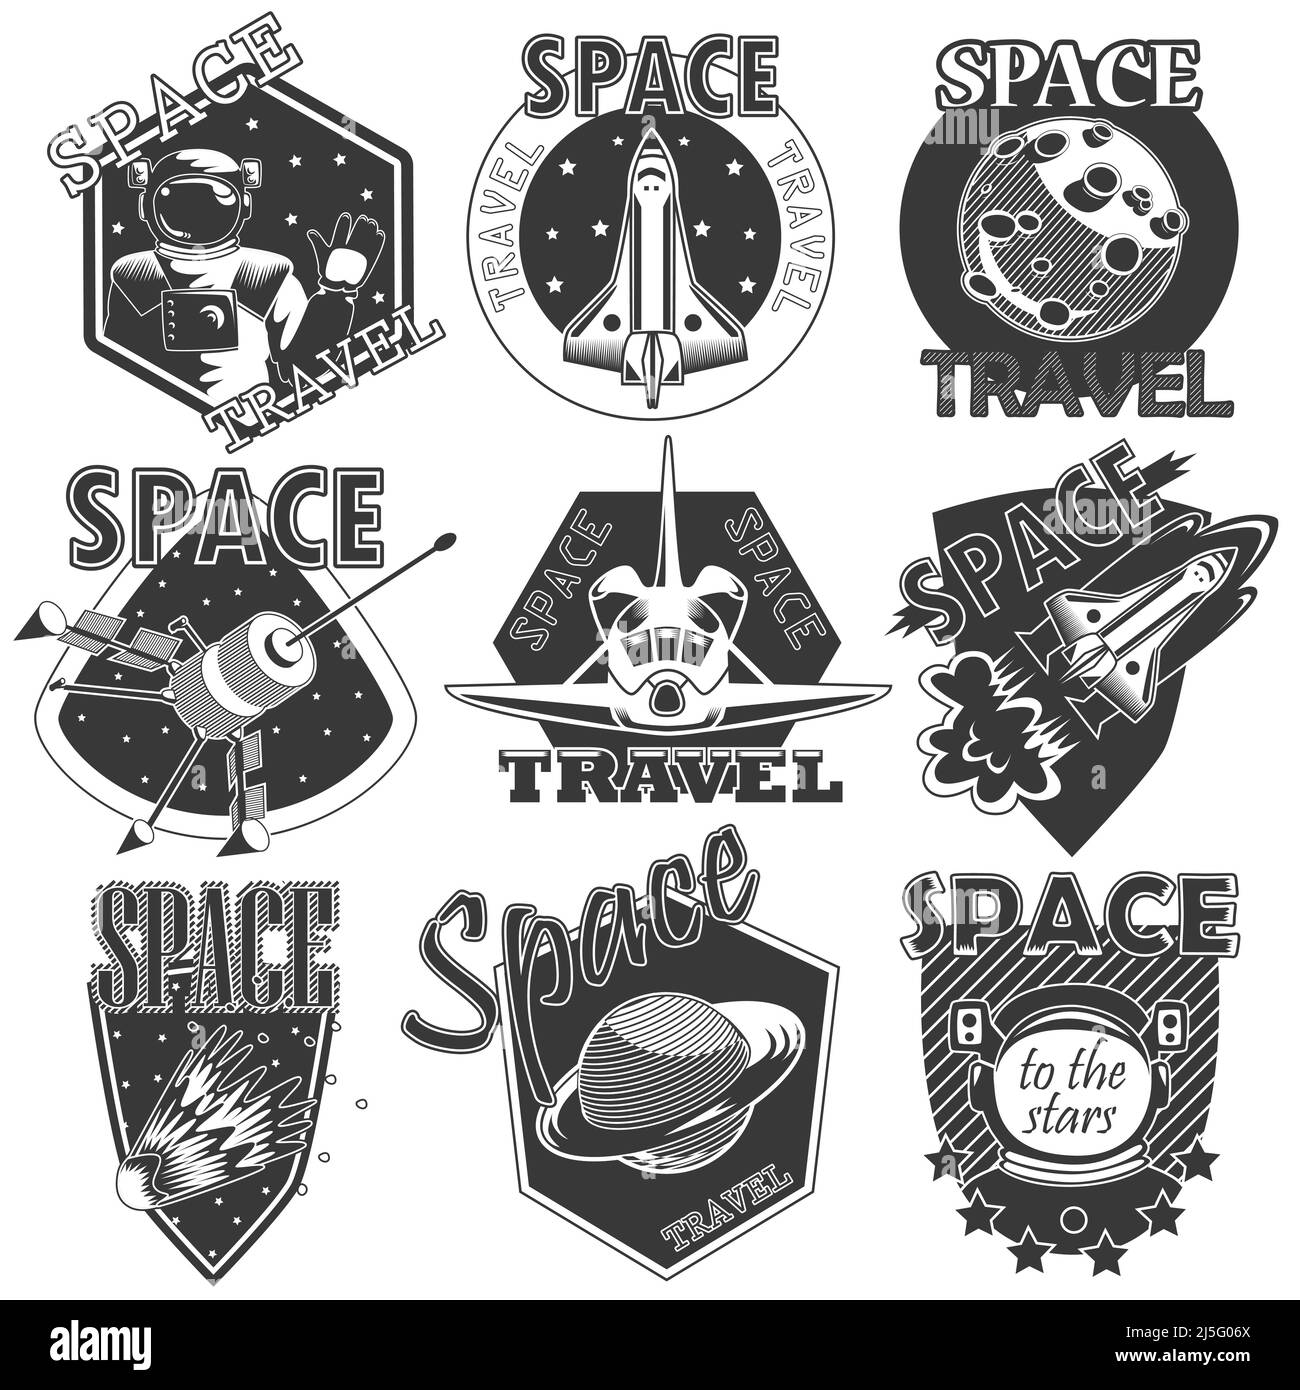 Set of vector icons of space. Elements of design, badges, logo and emblem on a white background. The concept of space travel Stock Vector